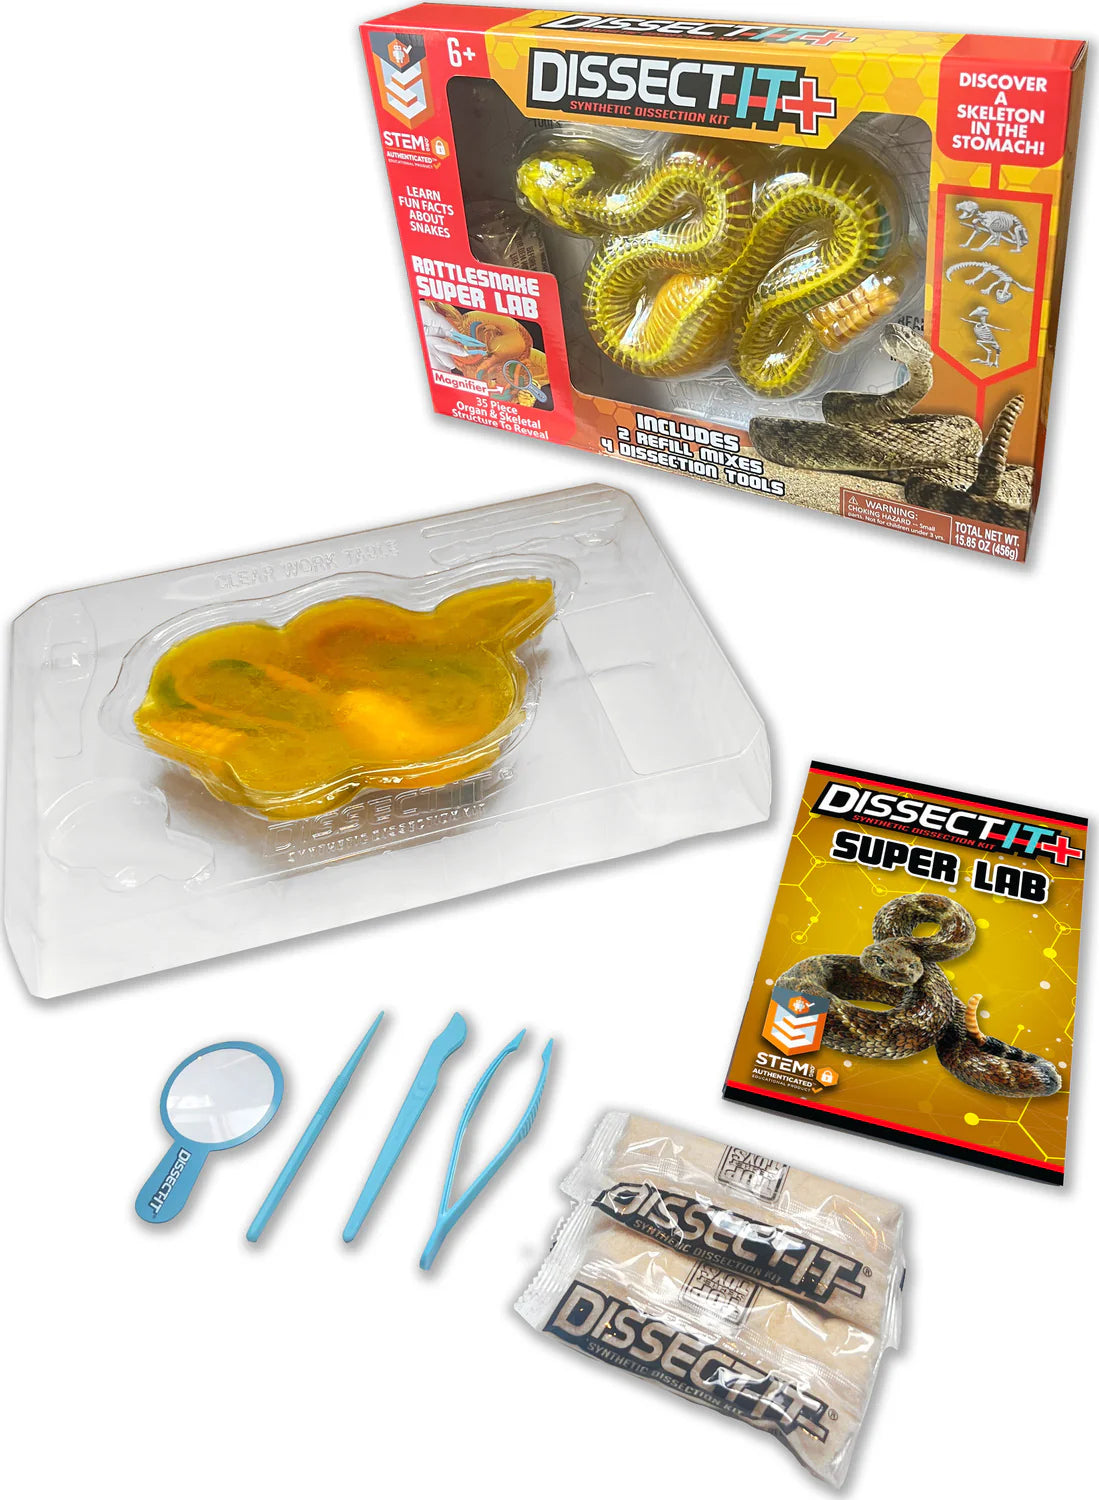 Dissect-It+ Rattlesnake Super Lab Kit by Top Secret Toys # 1225-9906